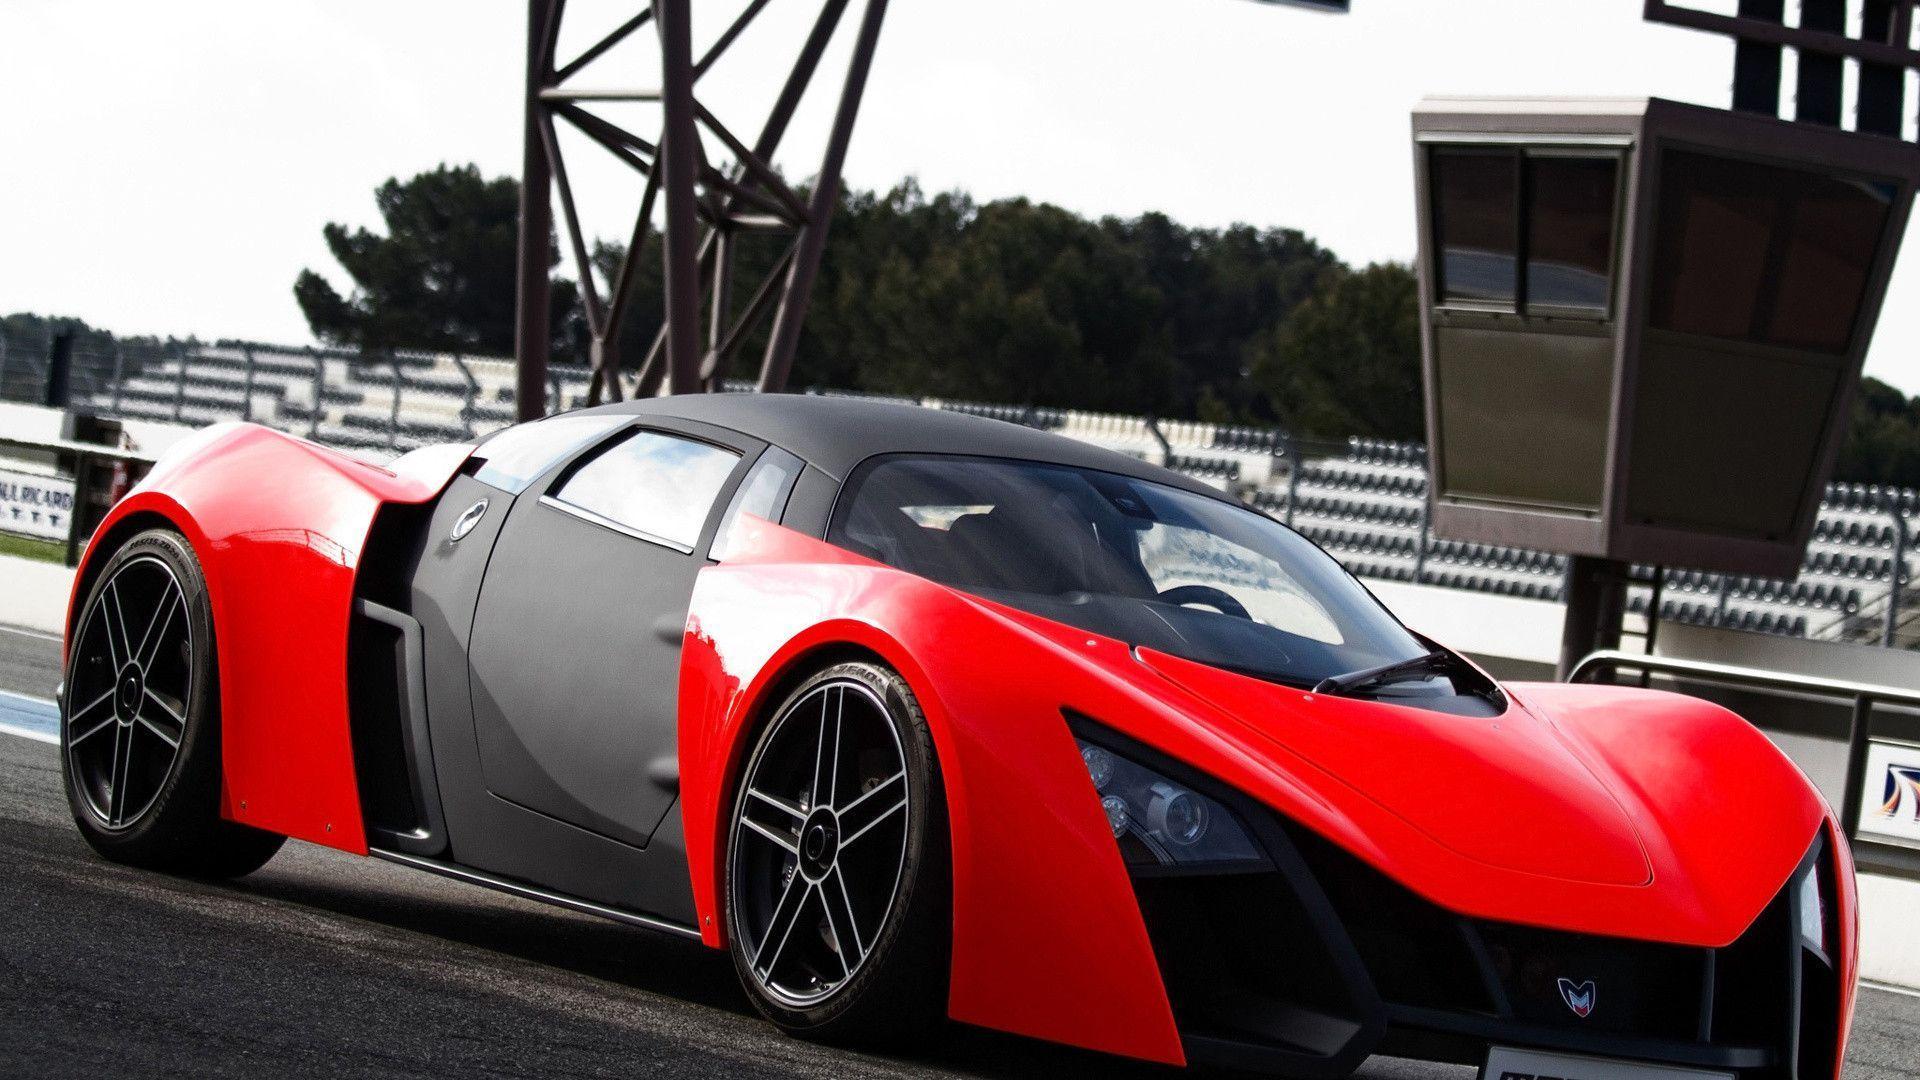 Red Sports Cars Hd Wallpapers - Super Cars Images Download , HD Wallpaper & Backgrounds